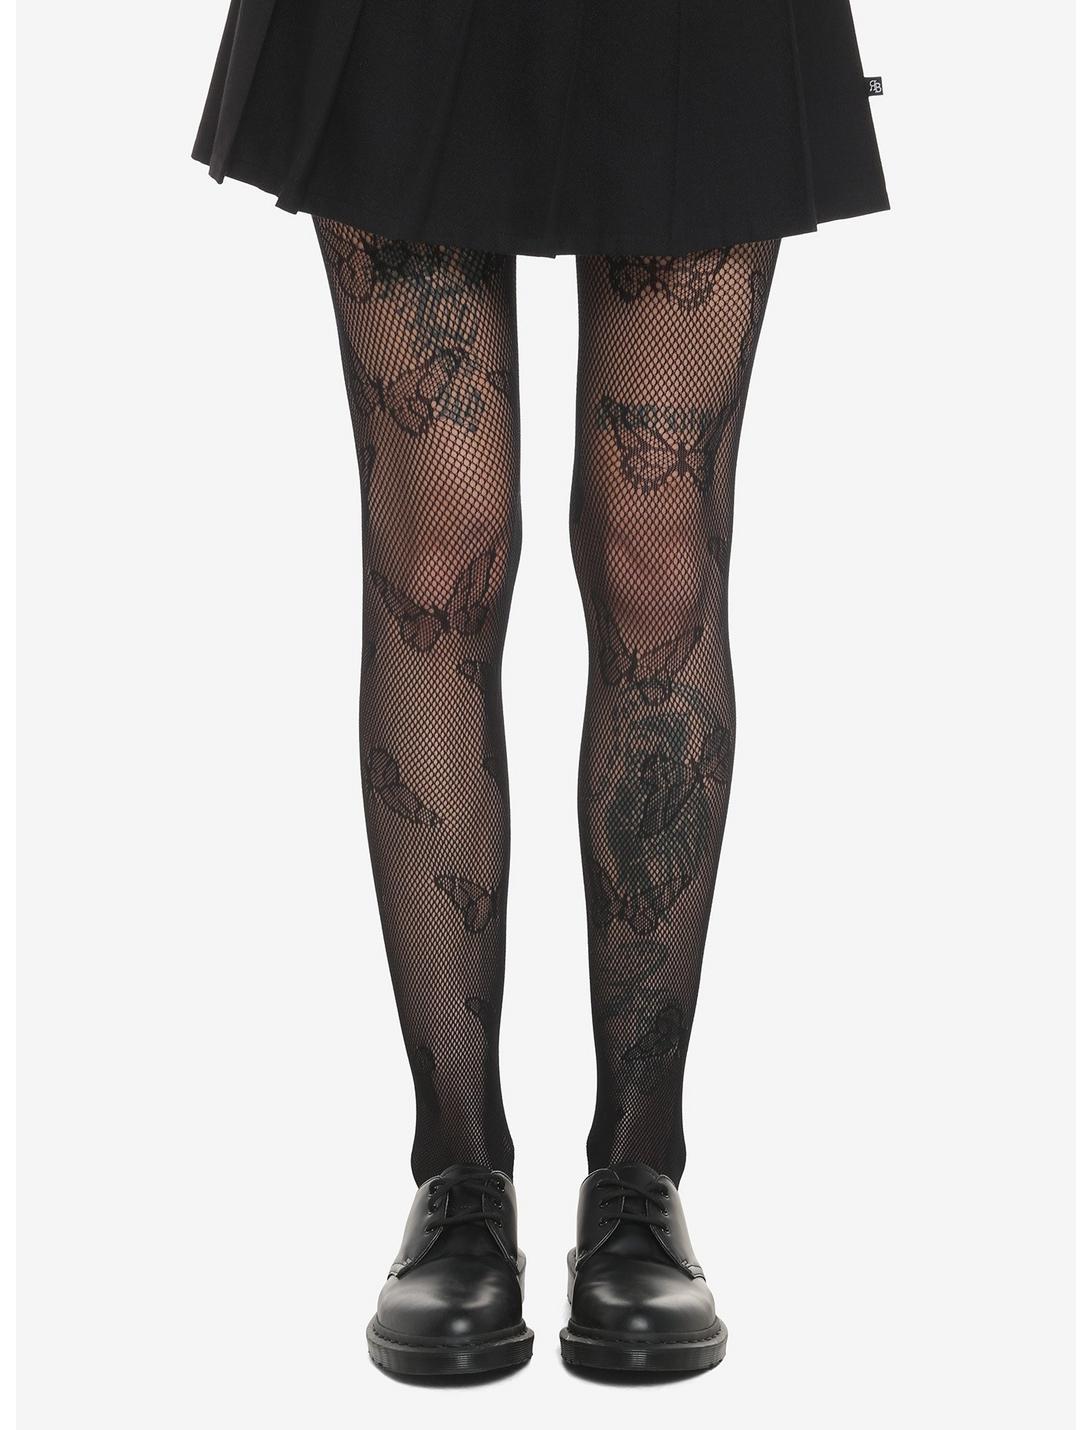 Black Butterfly Fishnet Tights